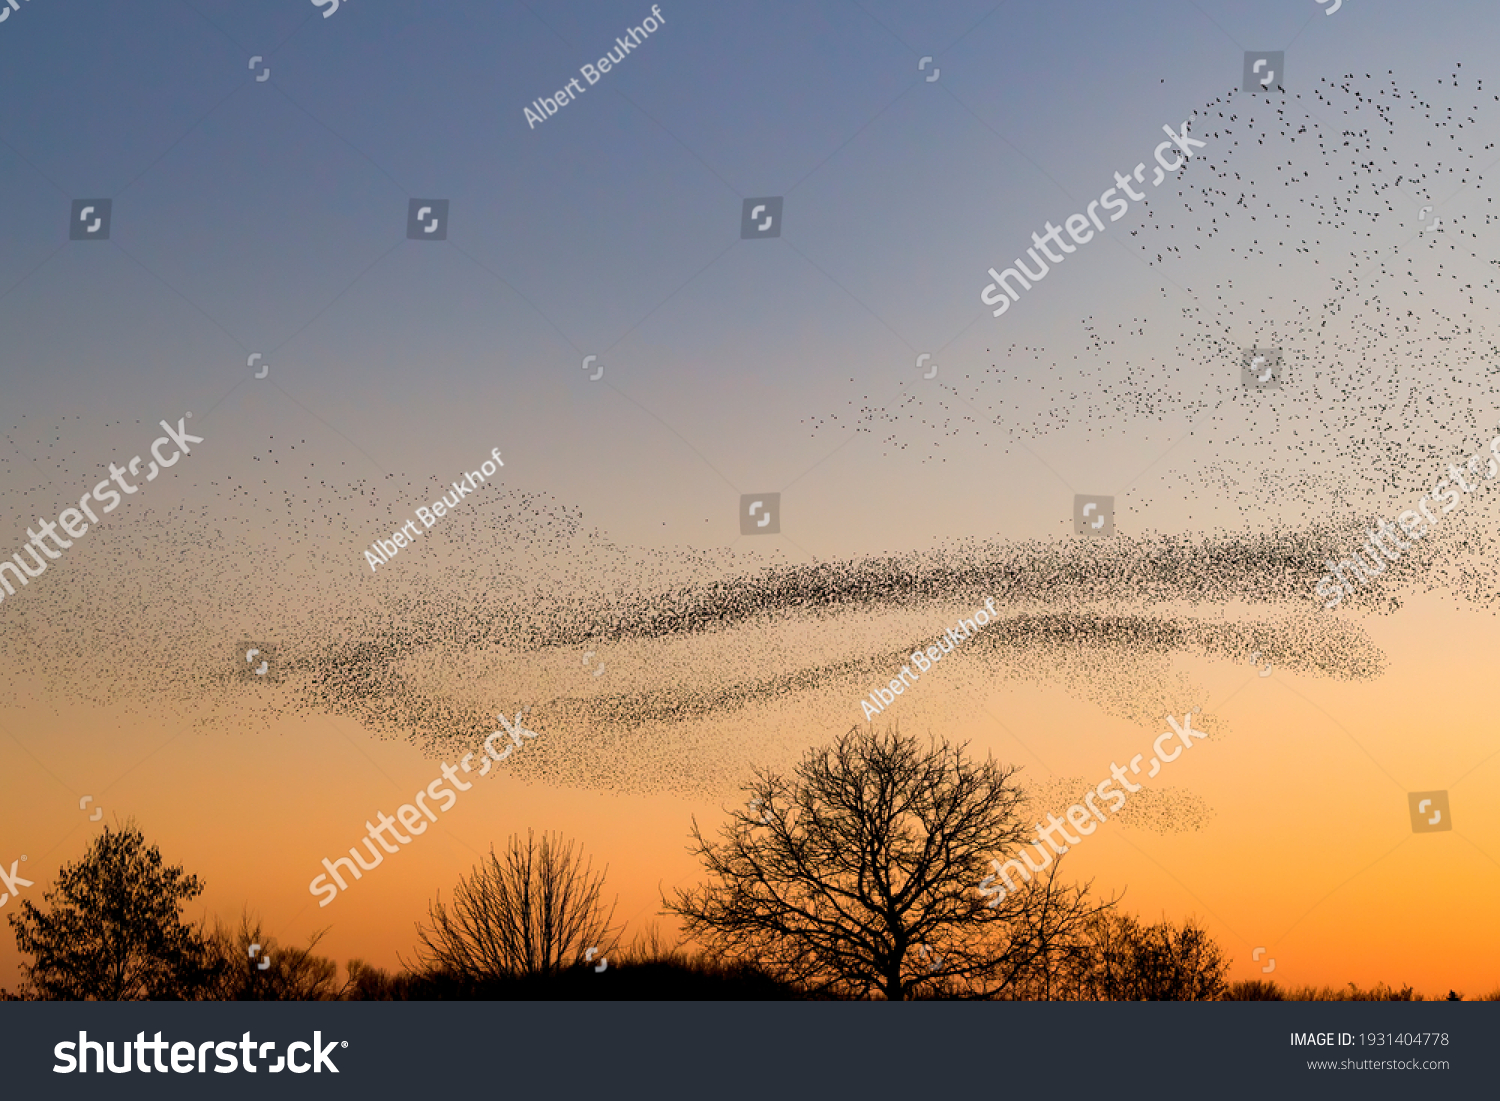 Beautiful large flock of starlings. A flock of starlings birds fly in the Netherlands. During January and February, hundreds of thousands of starlings gathered in huge clouds. Starling murmurations.
 #1931404778